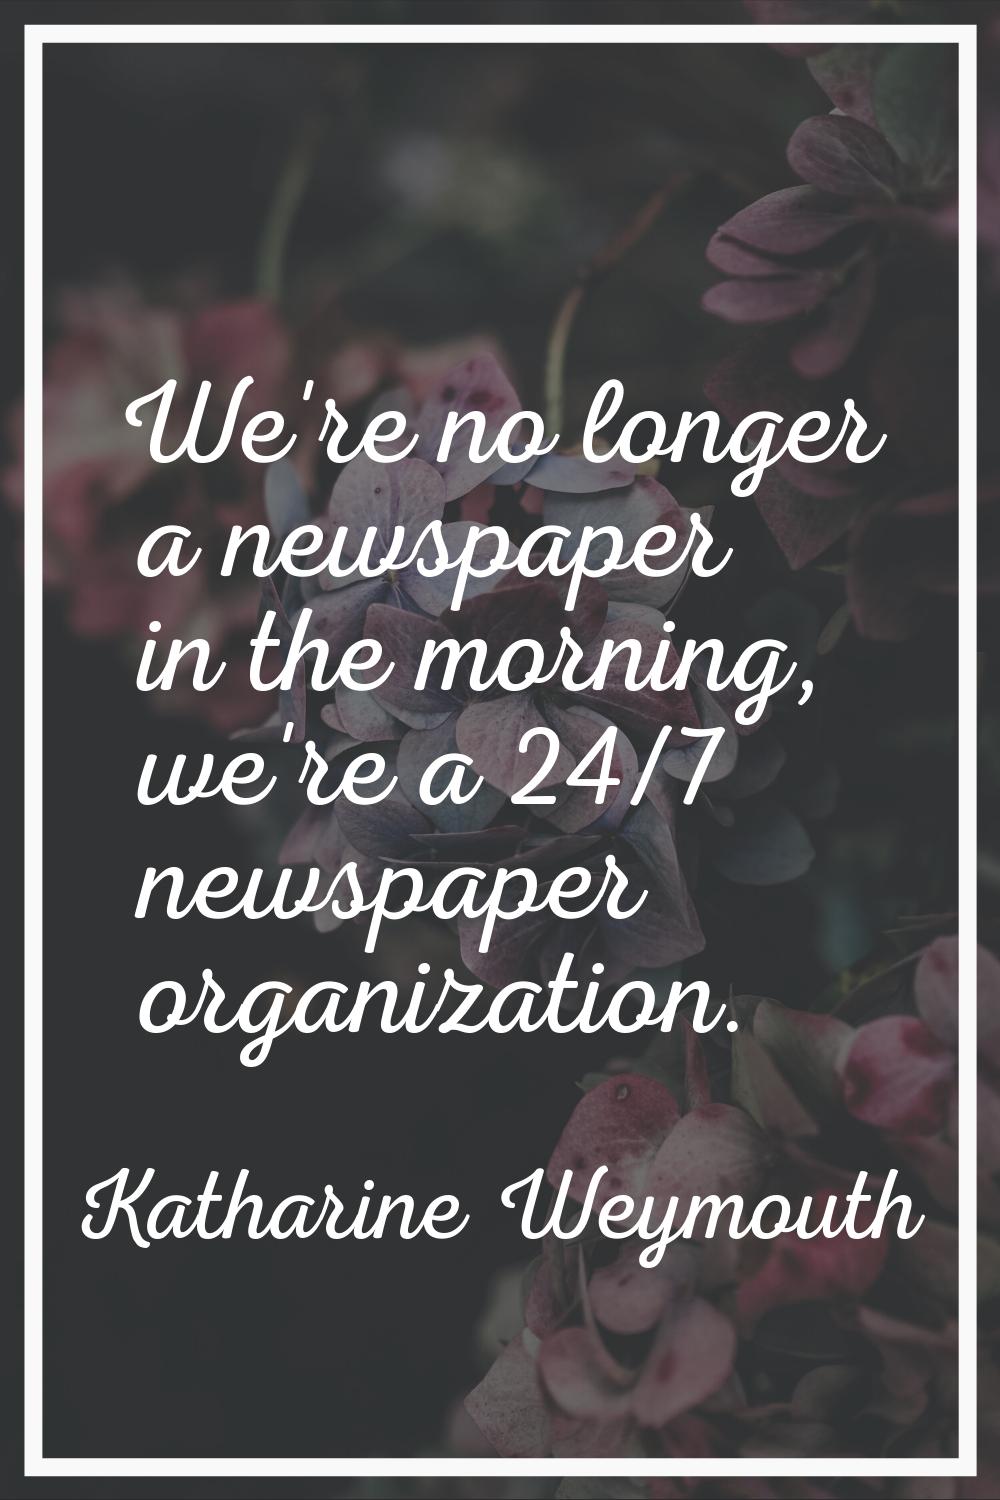 We're no longer a newspaper in the morning, we're a 24/7 newspaper organization.